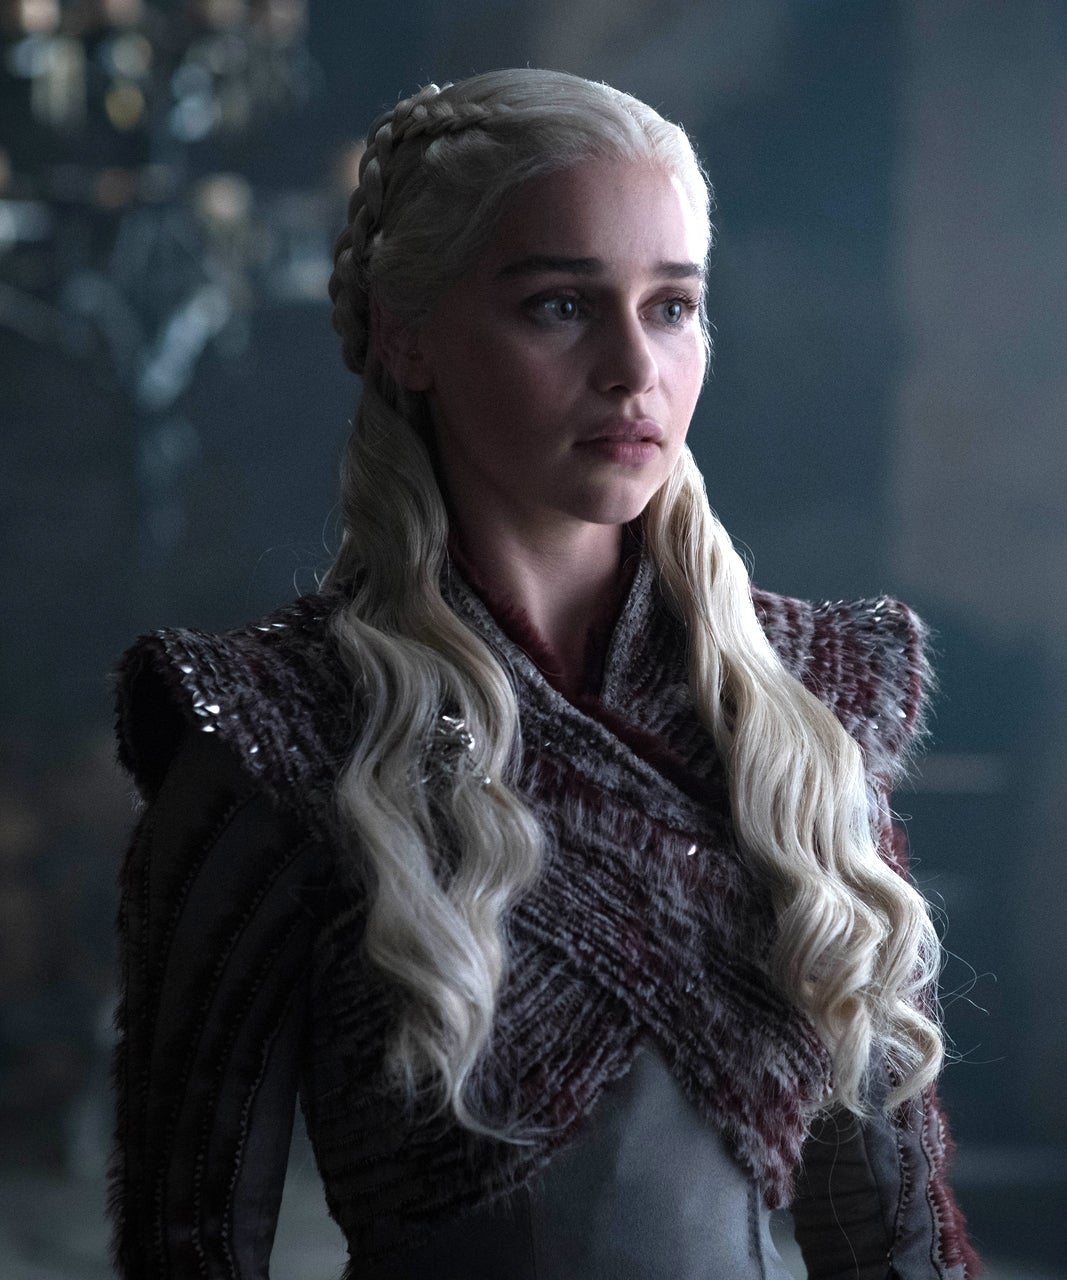 Game of Thrones: HBO Releases House of Dragons Character Descriptions